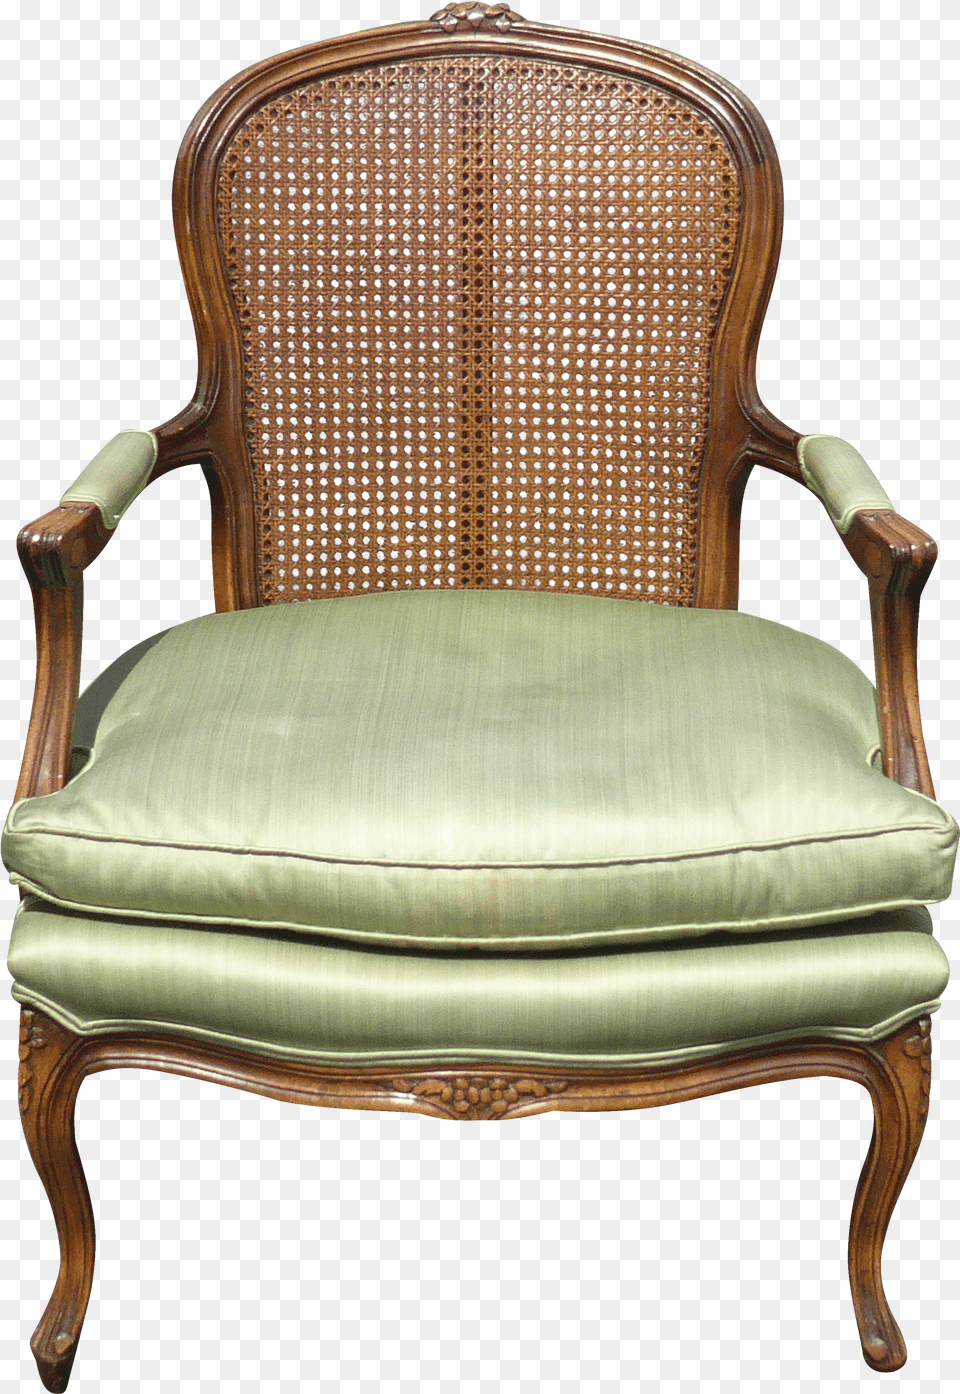 Park Chair Png Image